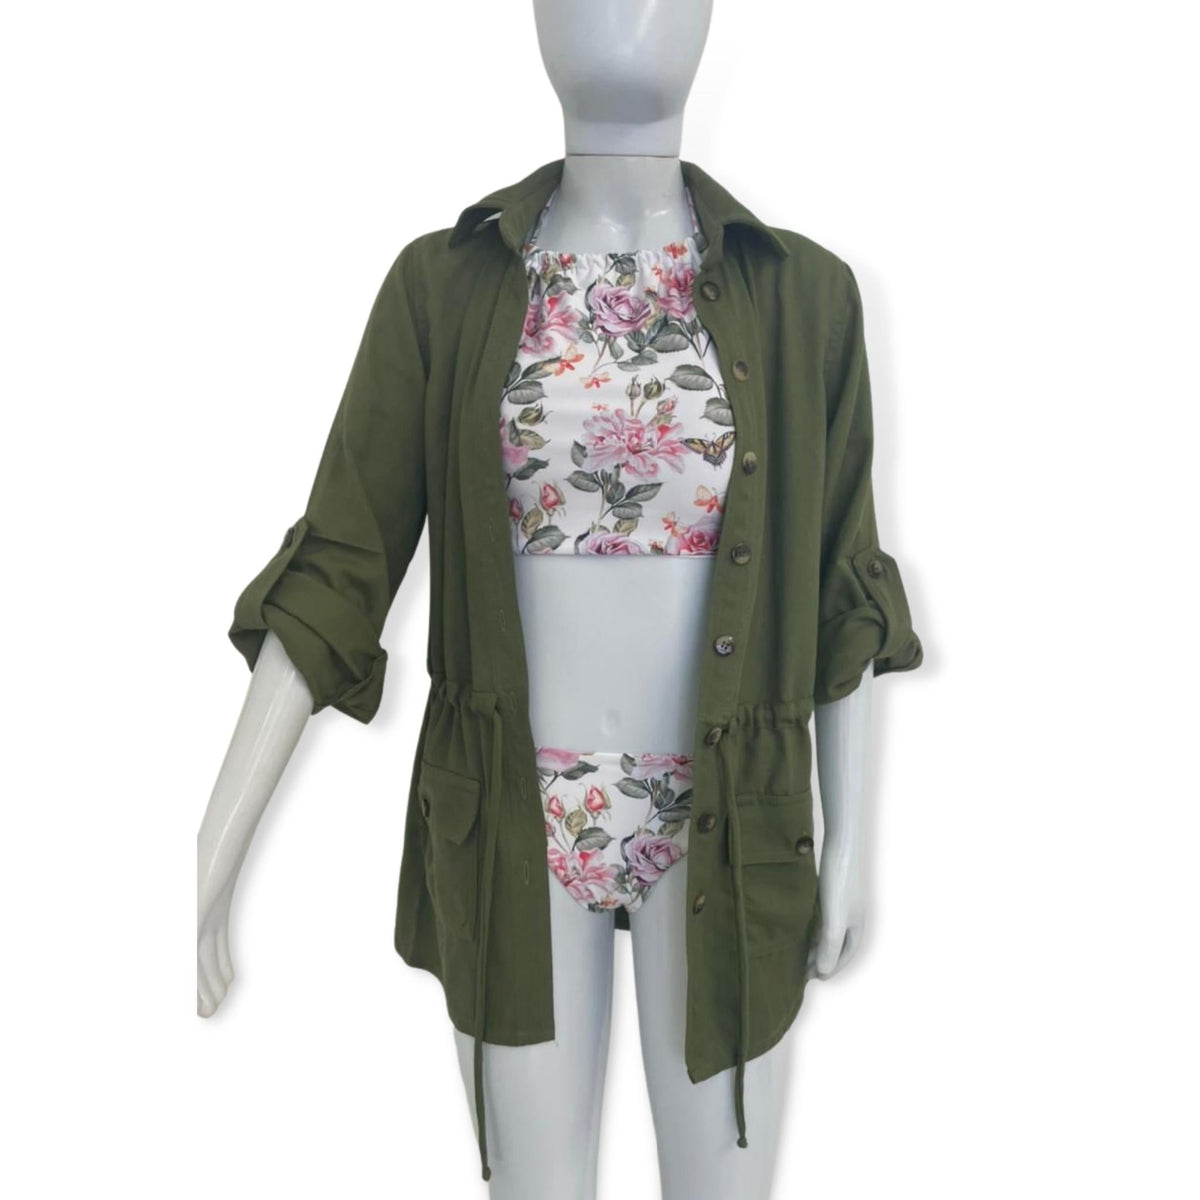 Dalai Green Florence Cover Up - a Spirit Animal - Cover Ups $60-$90 10 12